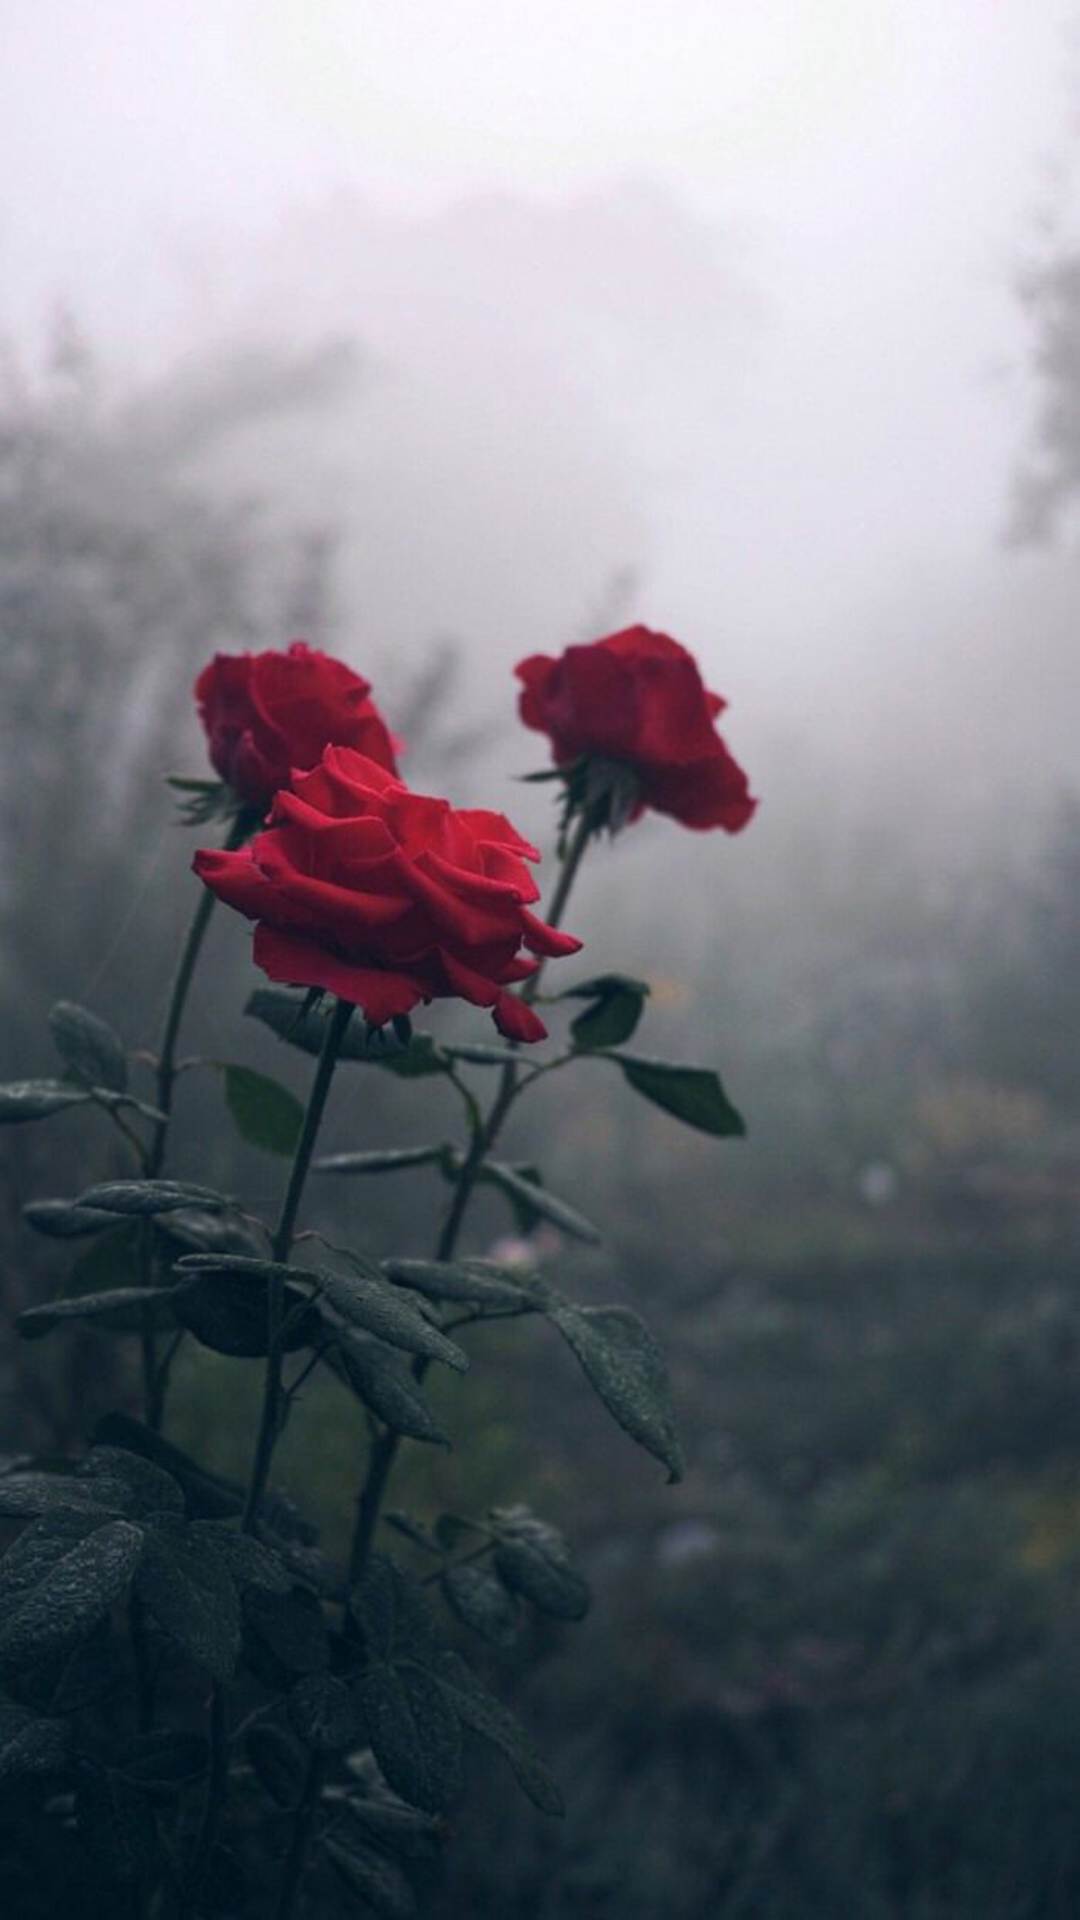 Wallpaper Red Roses in Close up Photography Background  Download Free  Image